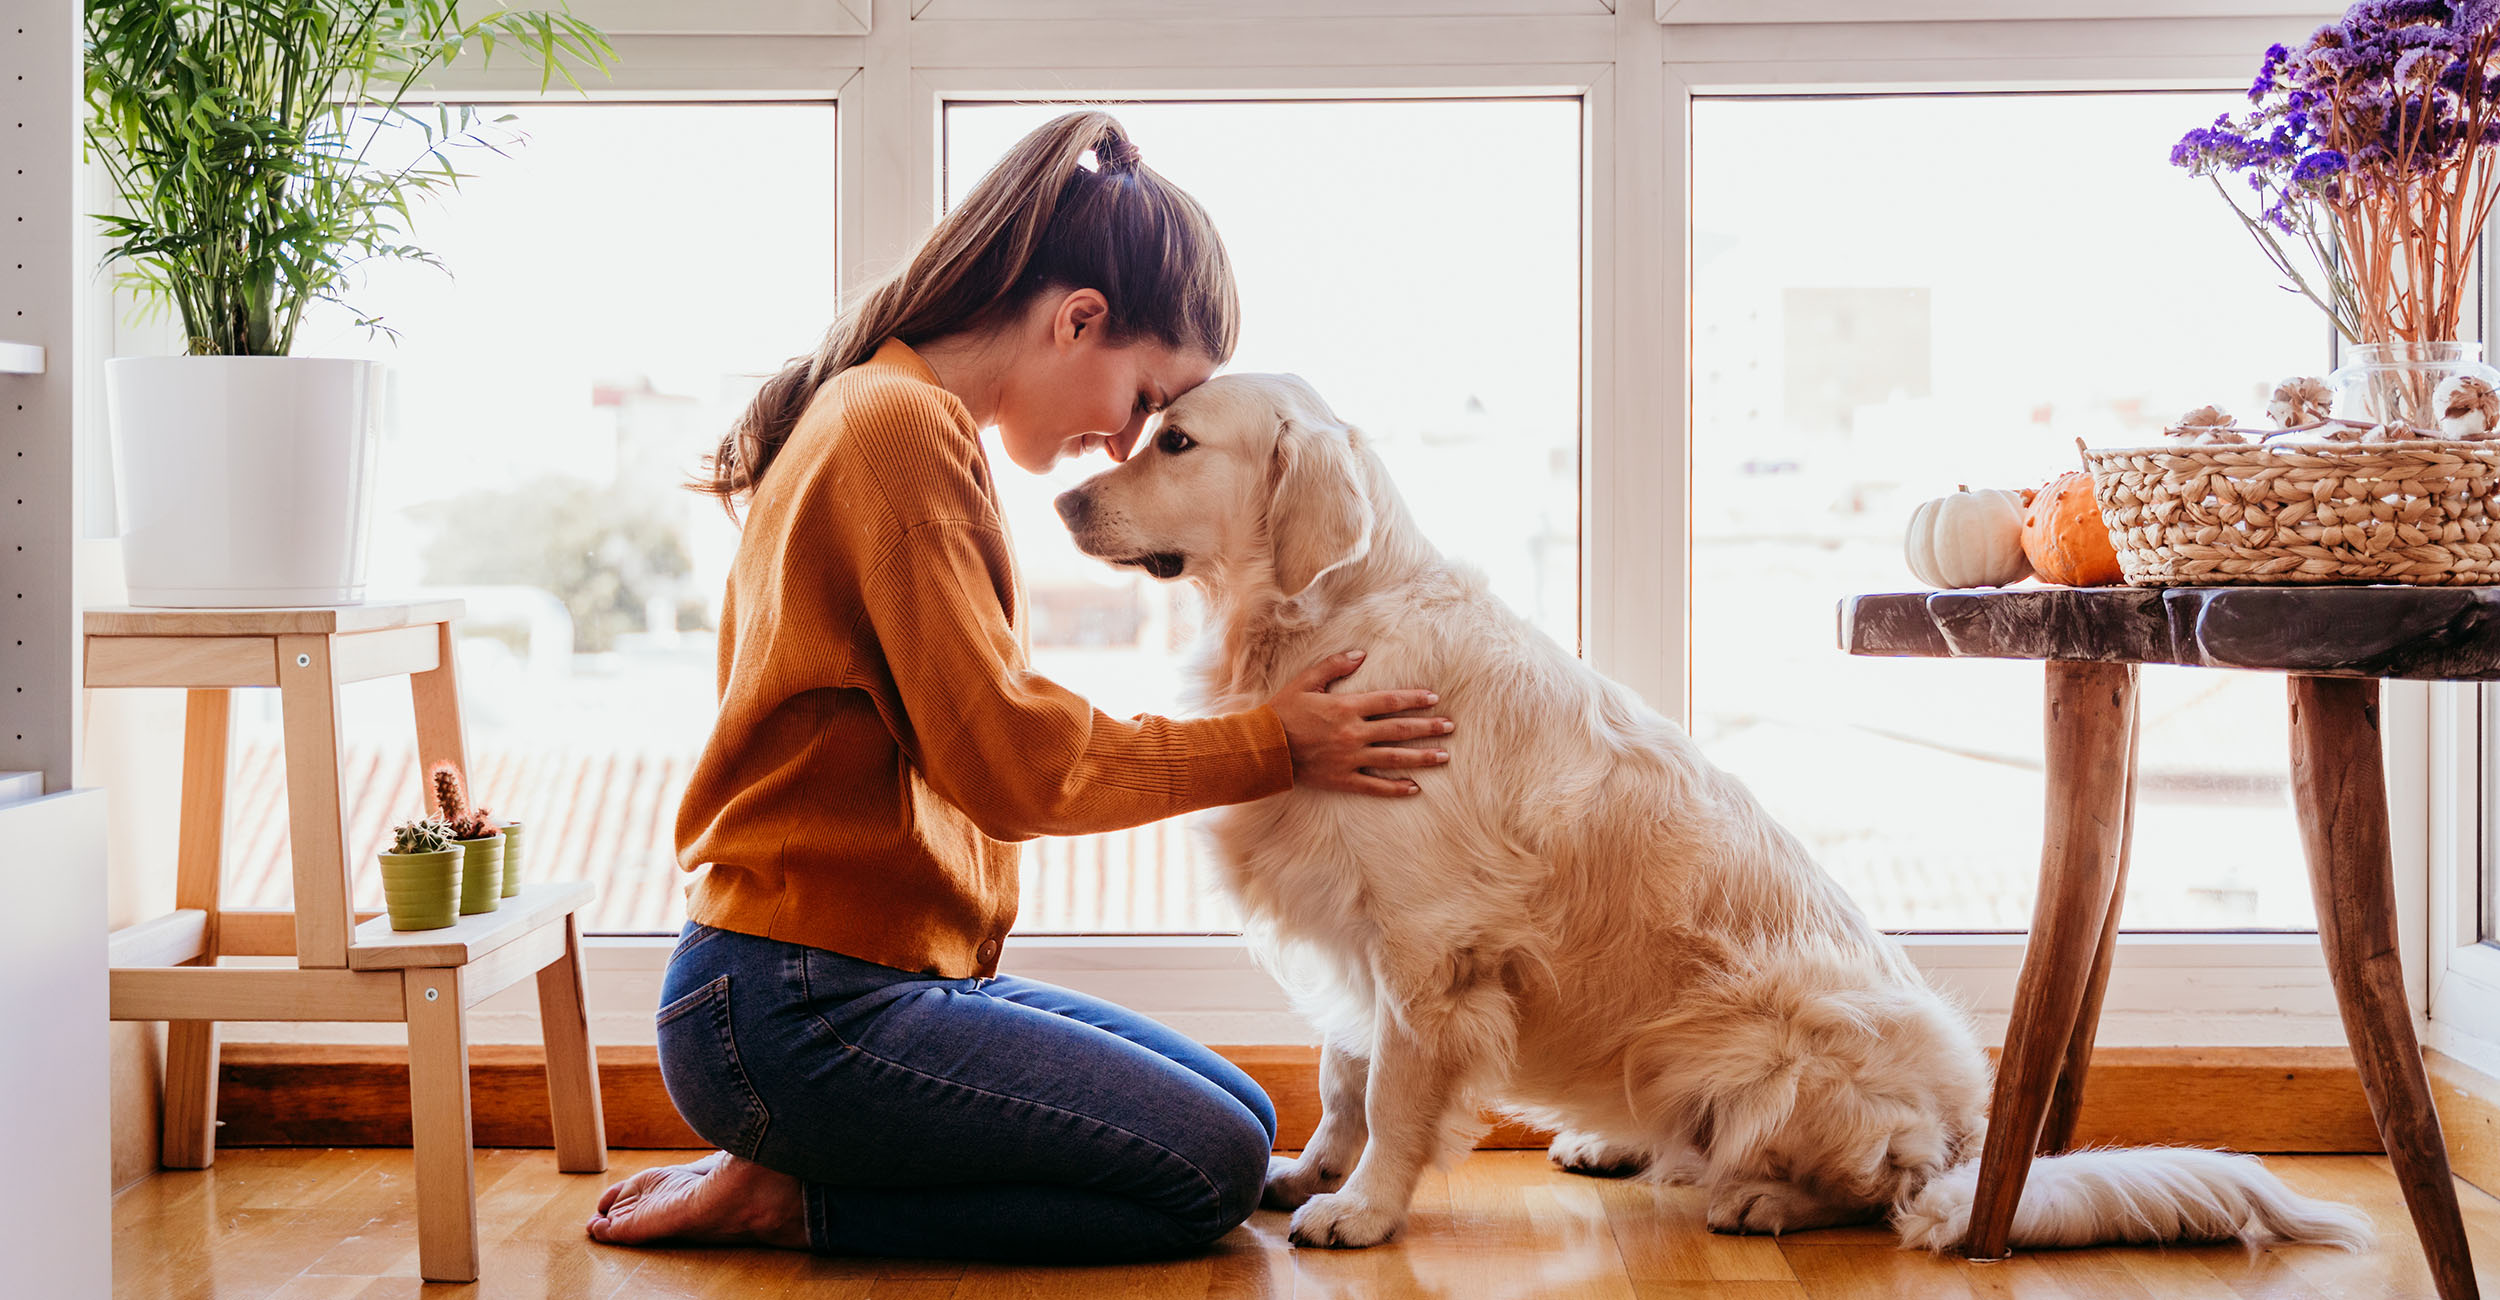 How Do Pets Help With Mental Health?